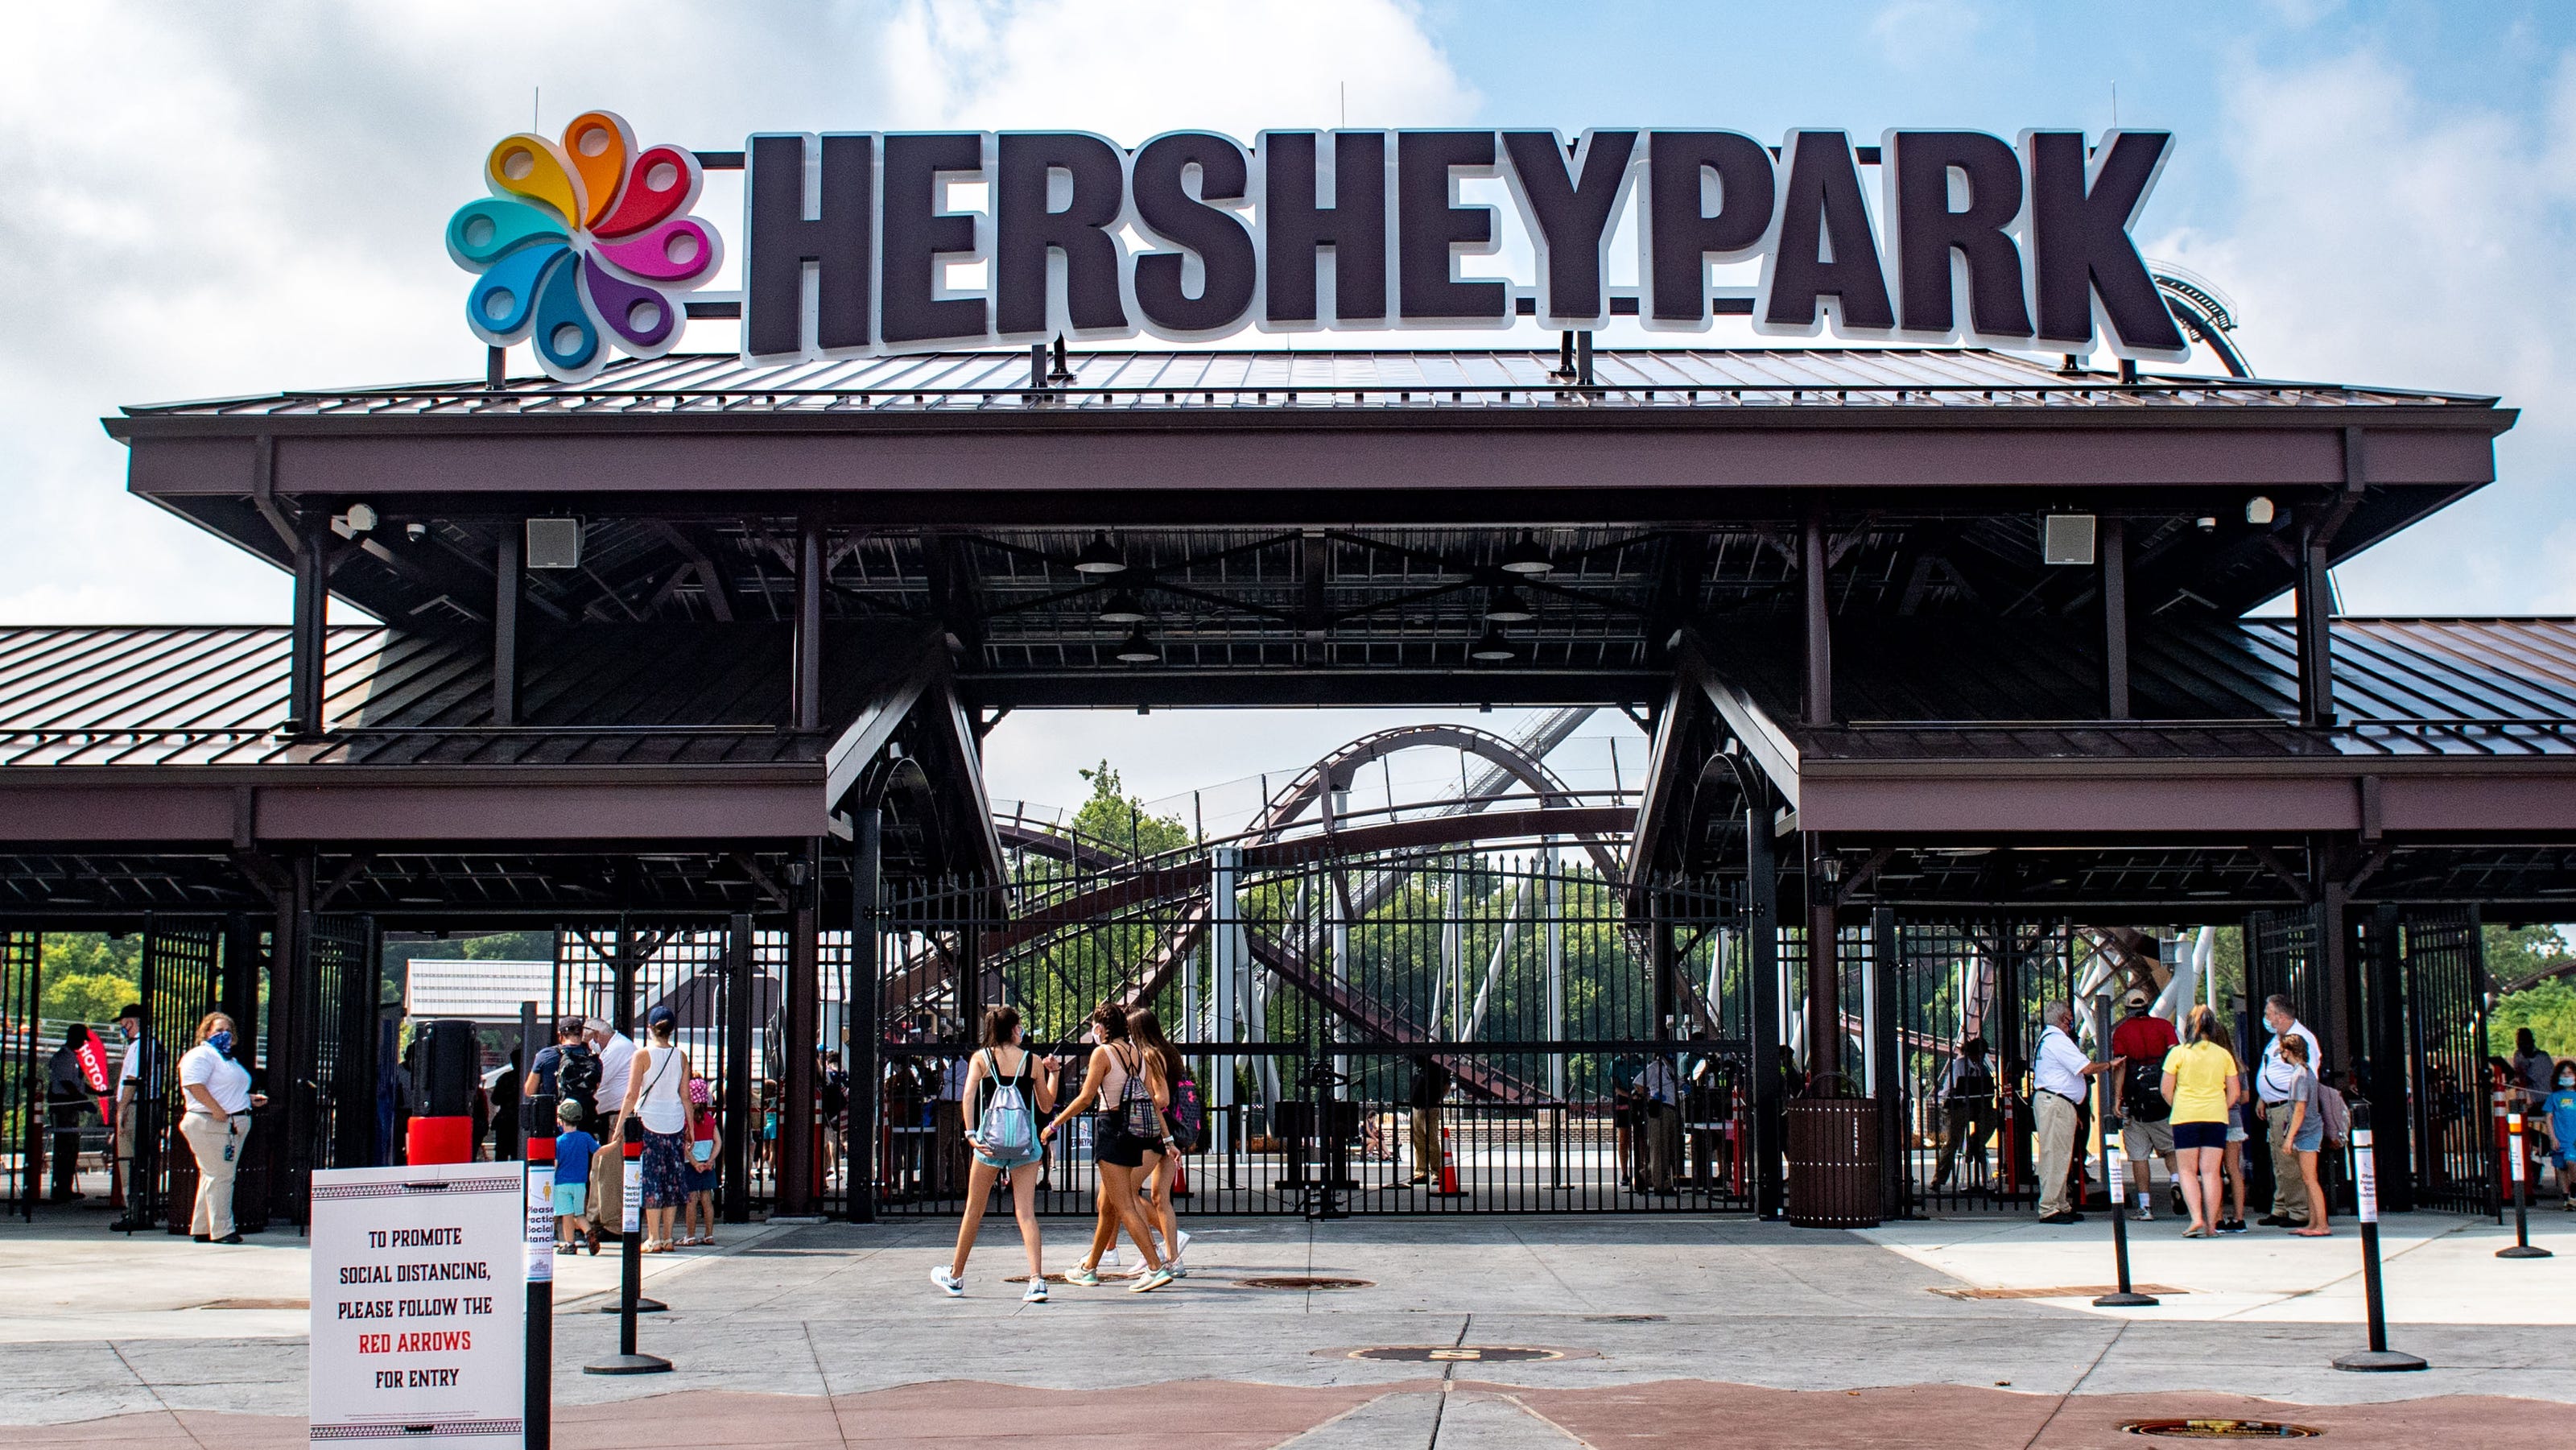 Hersheypark's opening involves masks, higher security and temperature checks